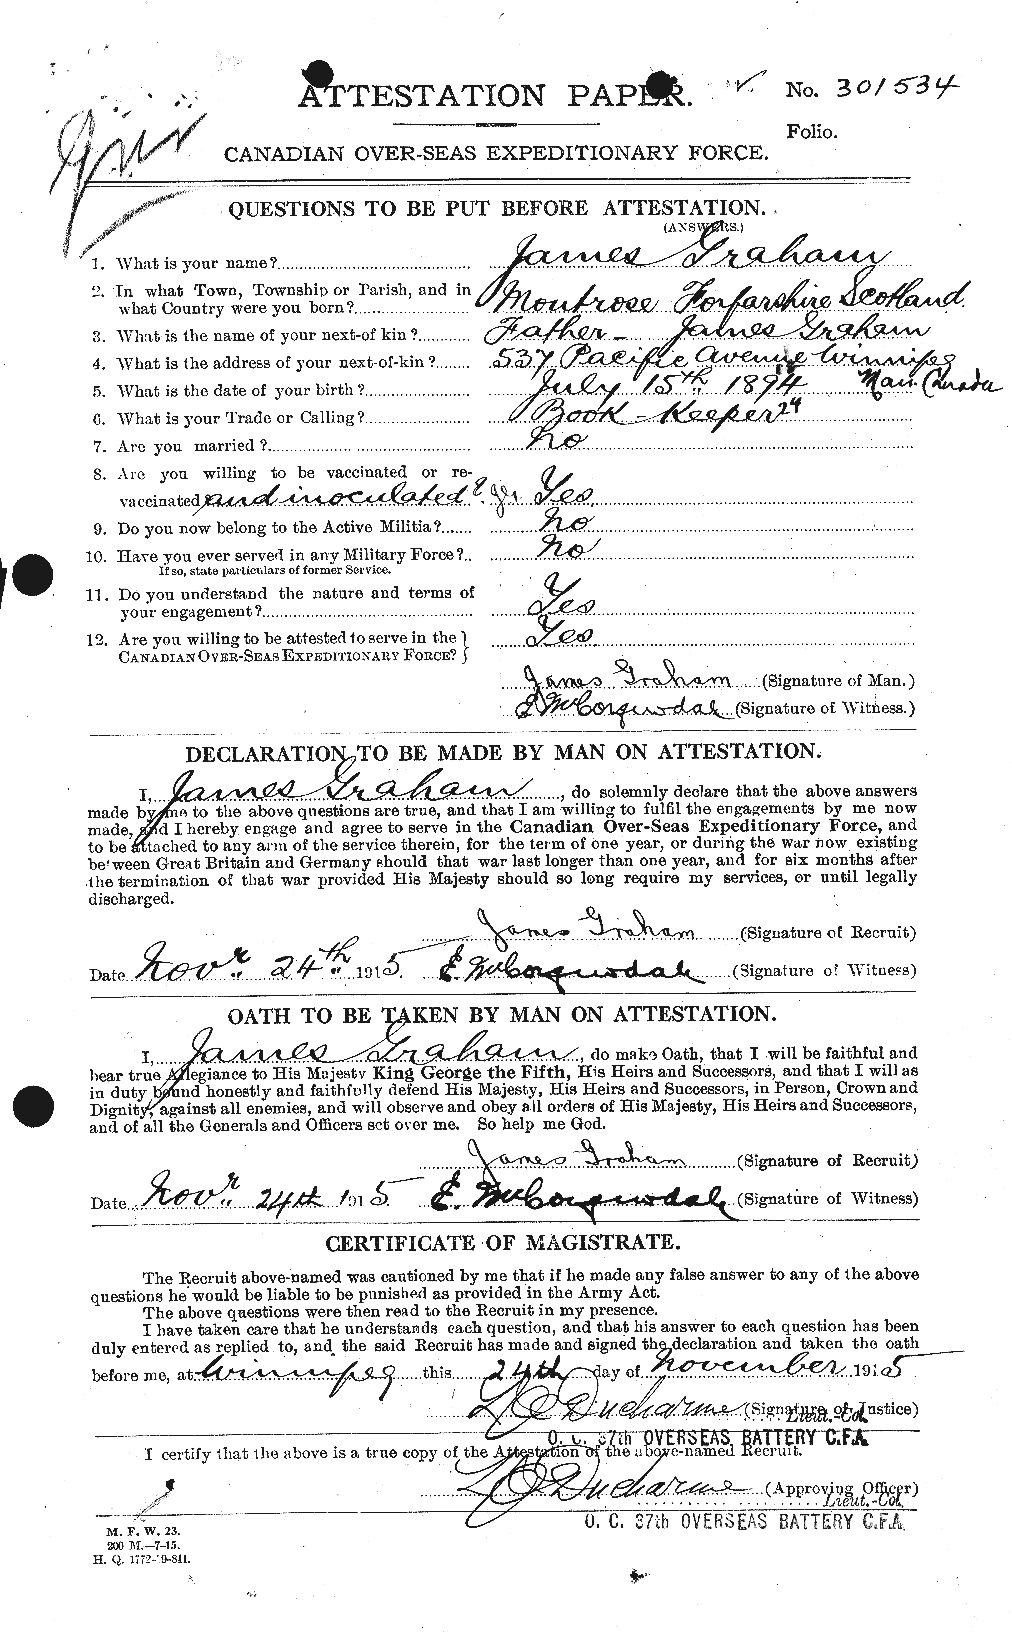 Personnel Records of the First World War - CEF 357799a